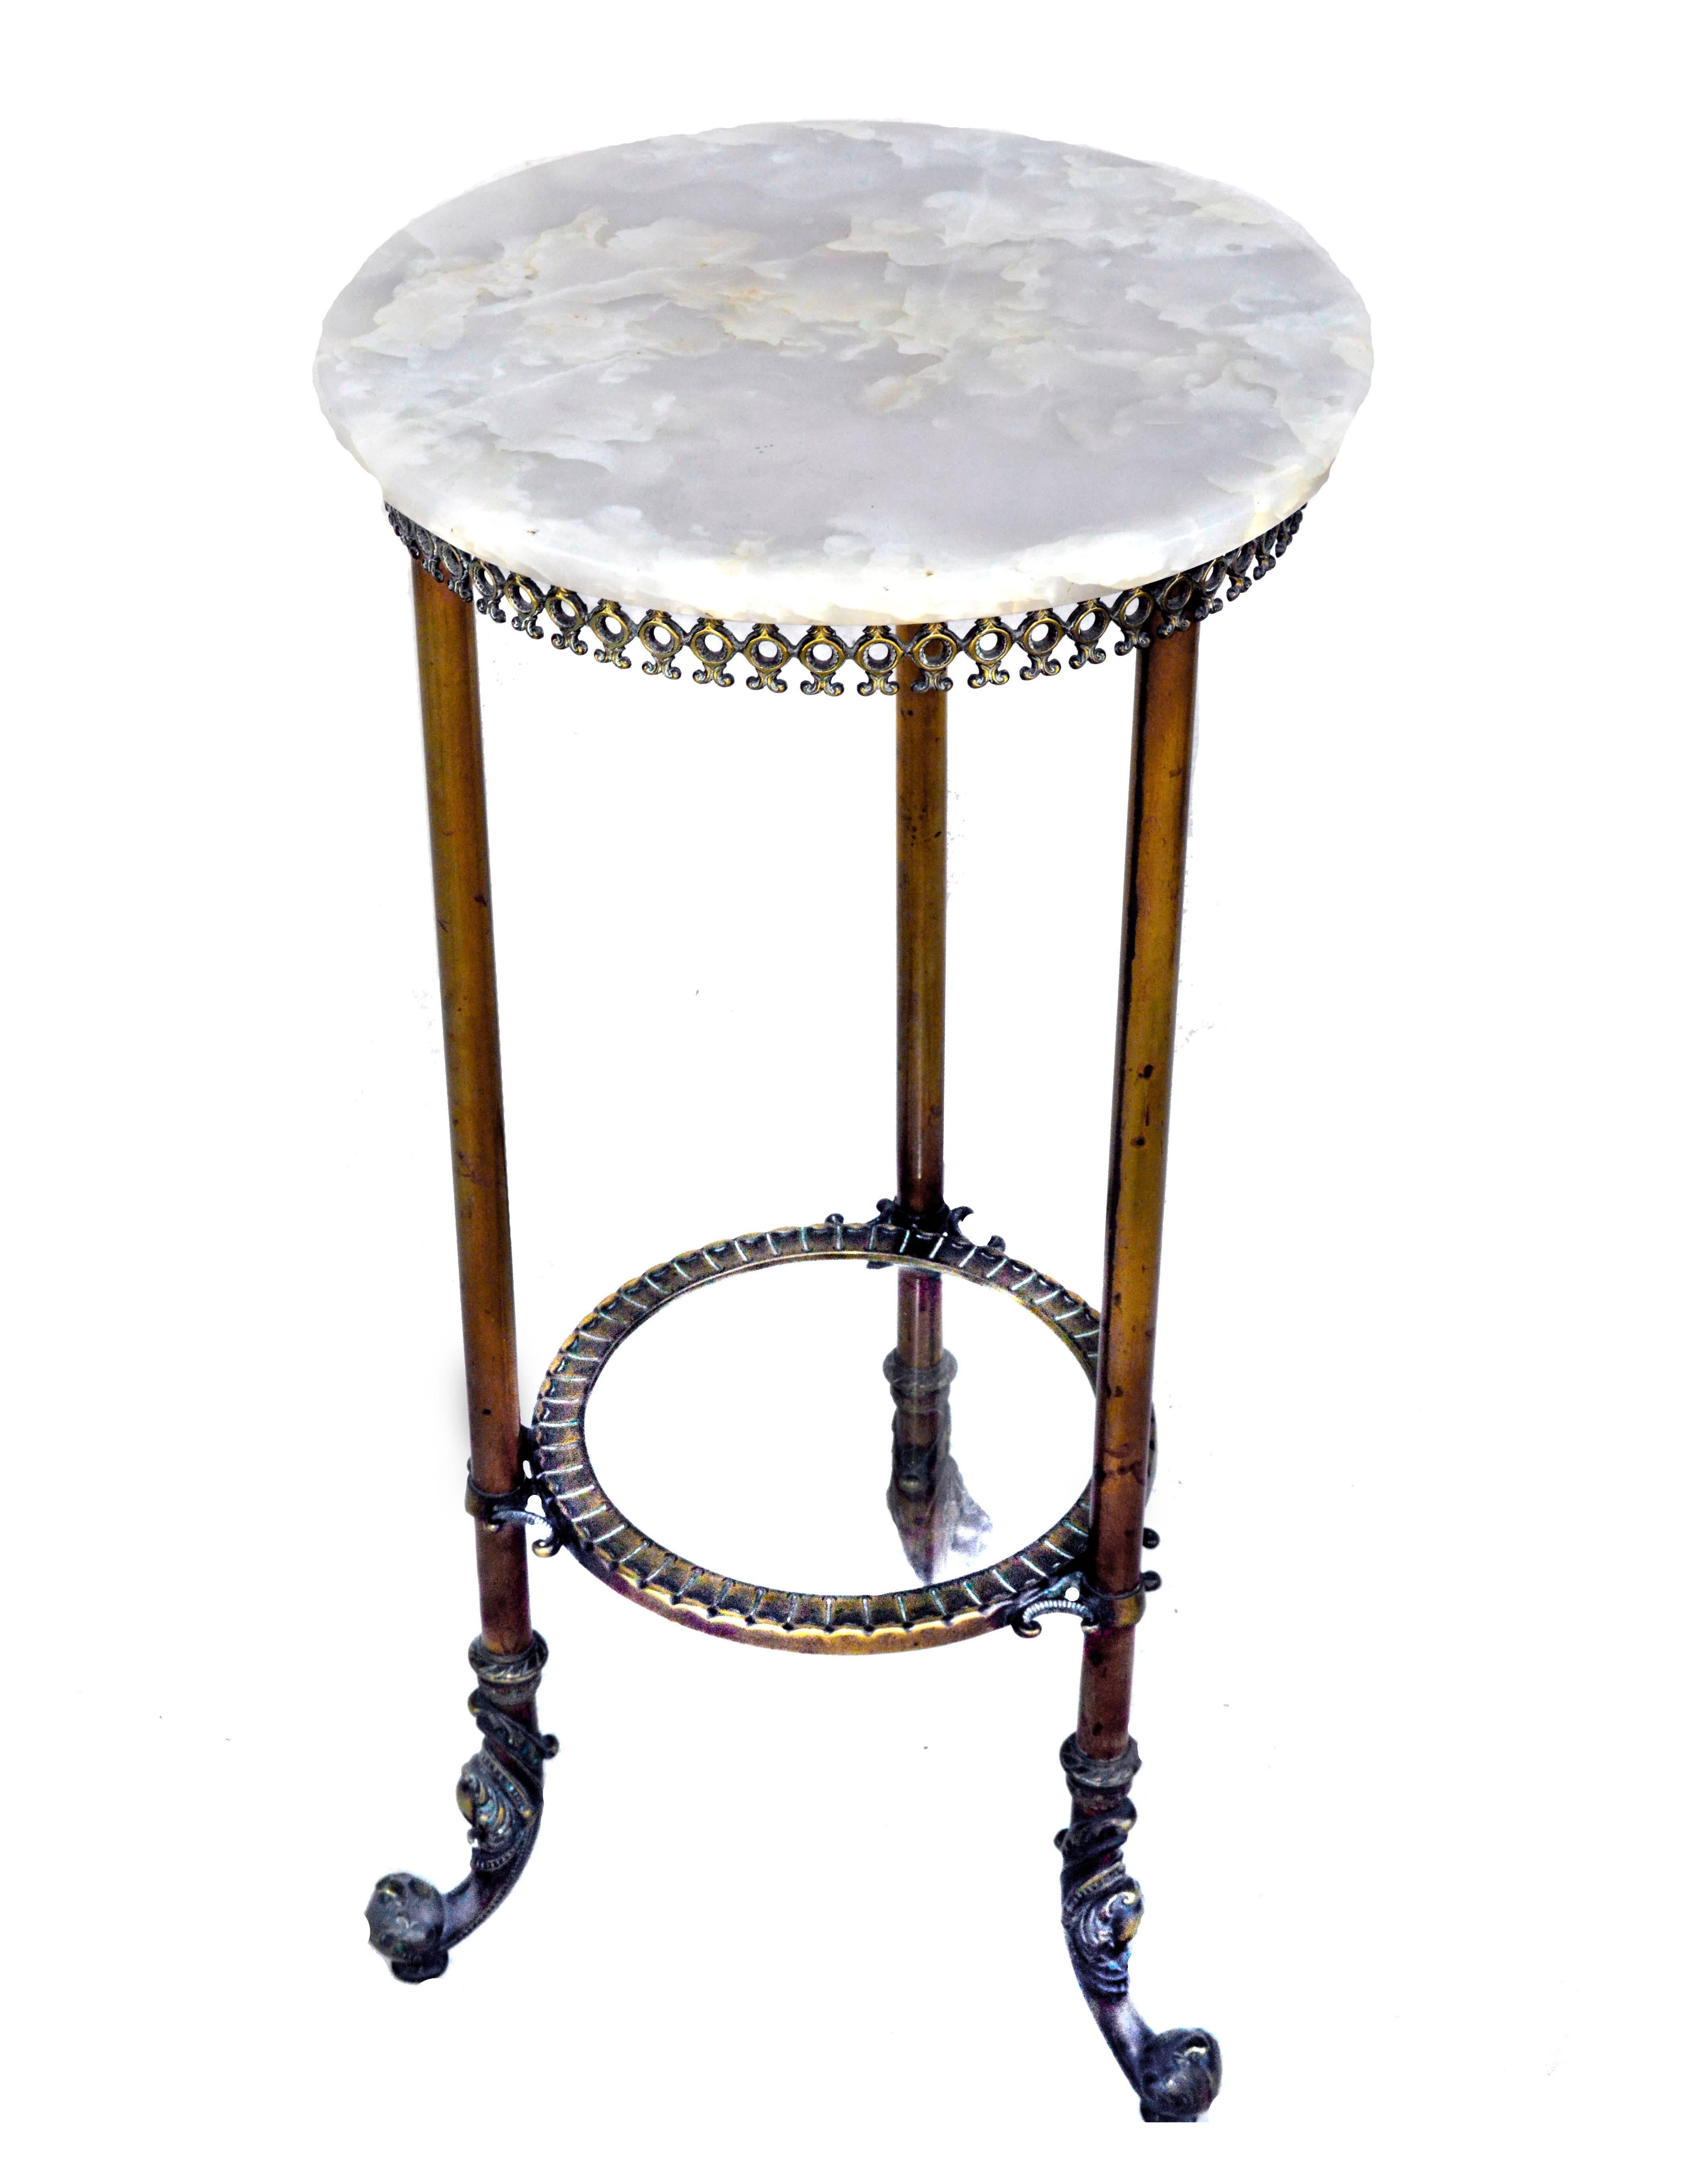 Three-legged marble and bronze table, round top. Round glass lower shelf, framed in bronze. Decorative feet. Measures: 31.5" H x 15" W x 15" D.